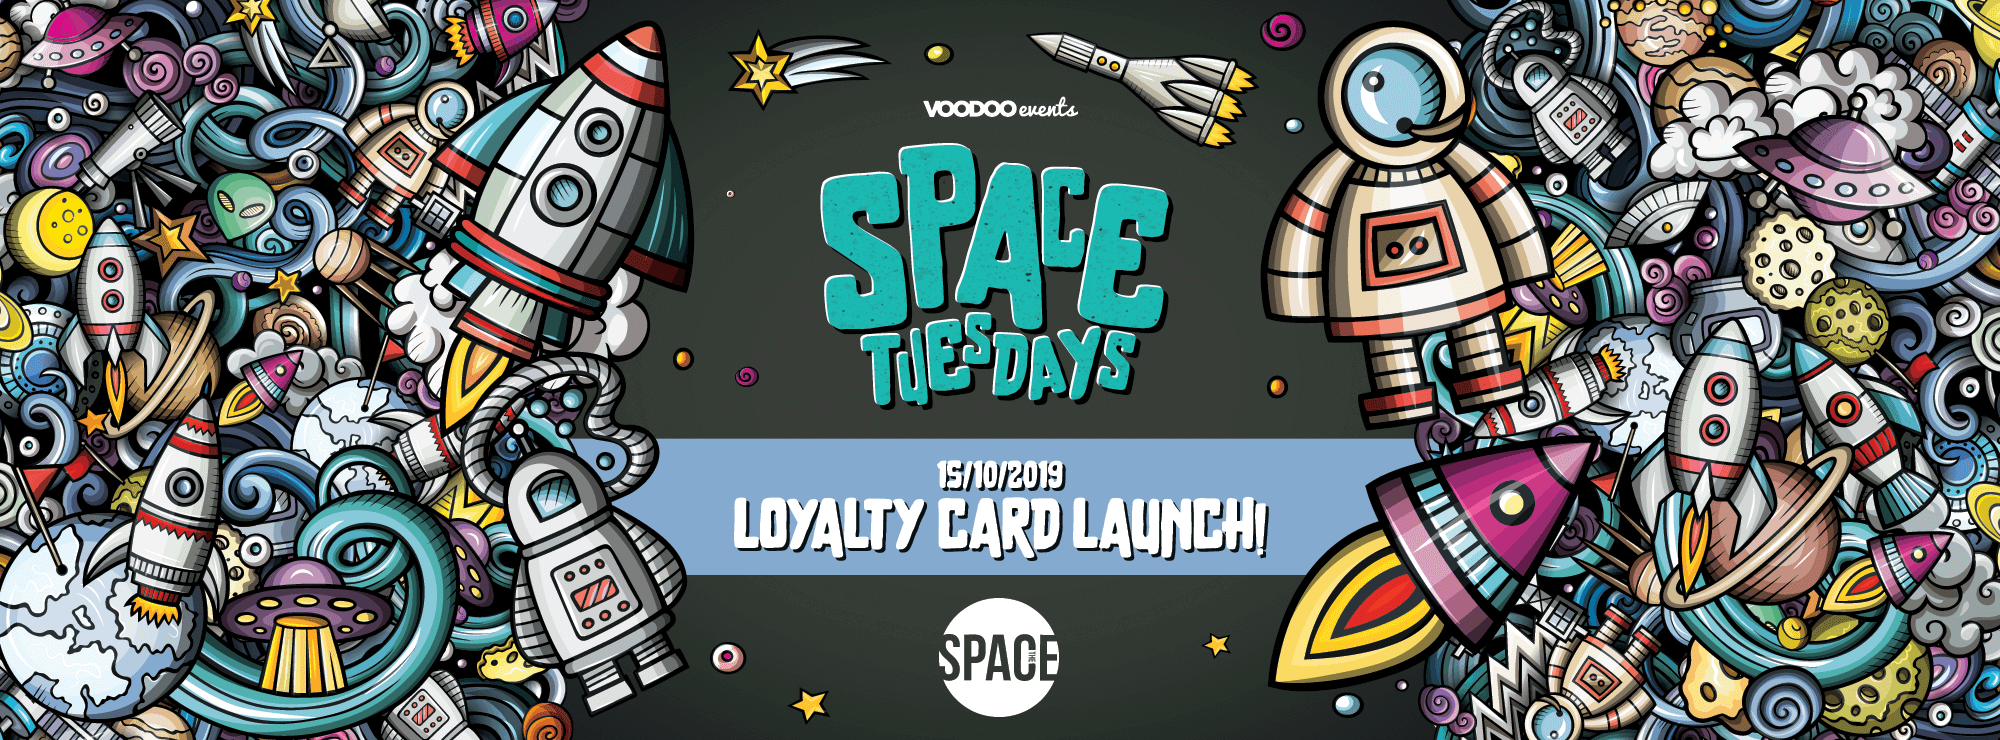 Space Tuesdays : Leeds – Loyalty Card Giveaway